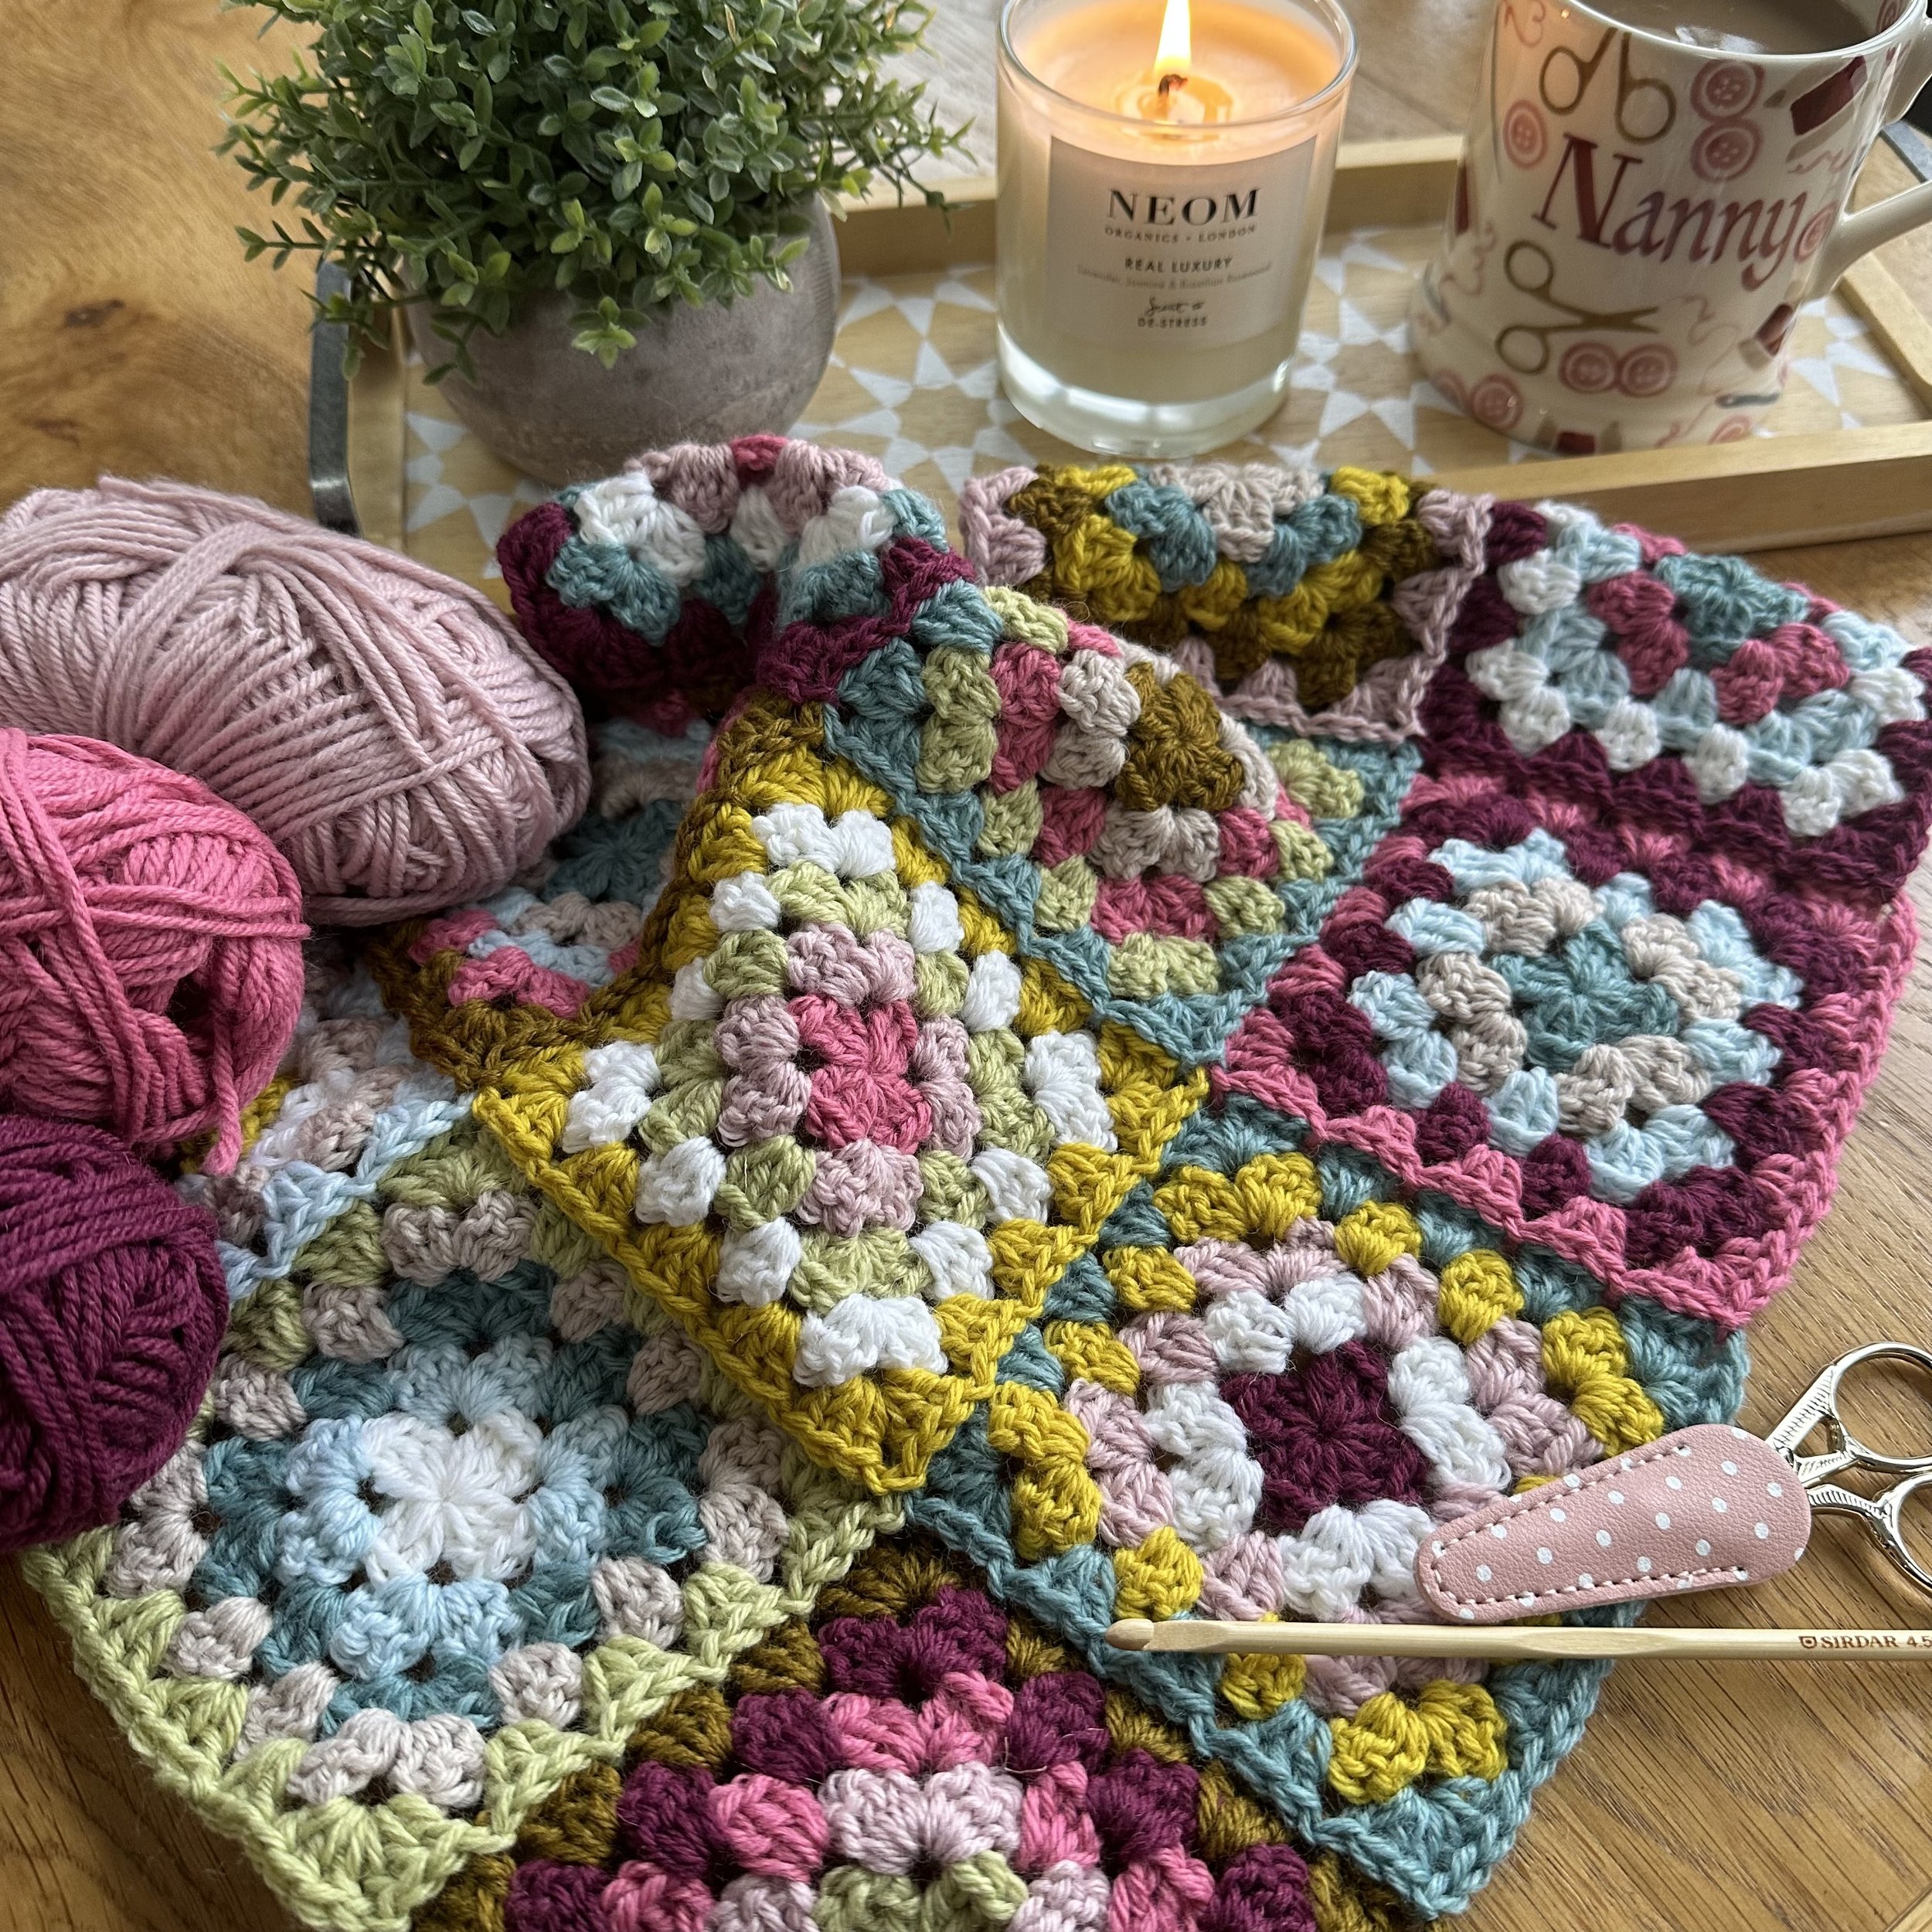 Join as you go' for Granny Squares' — madebyanita